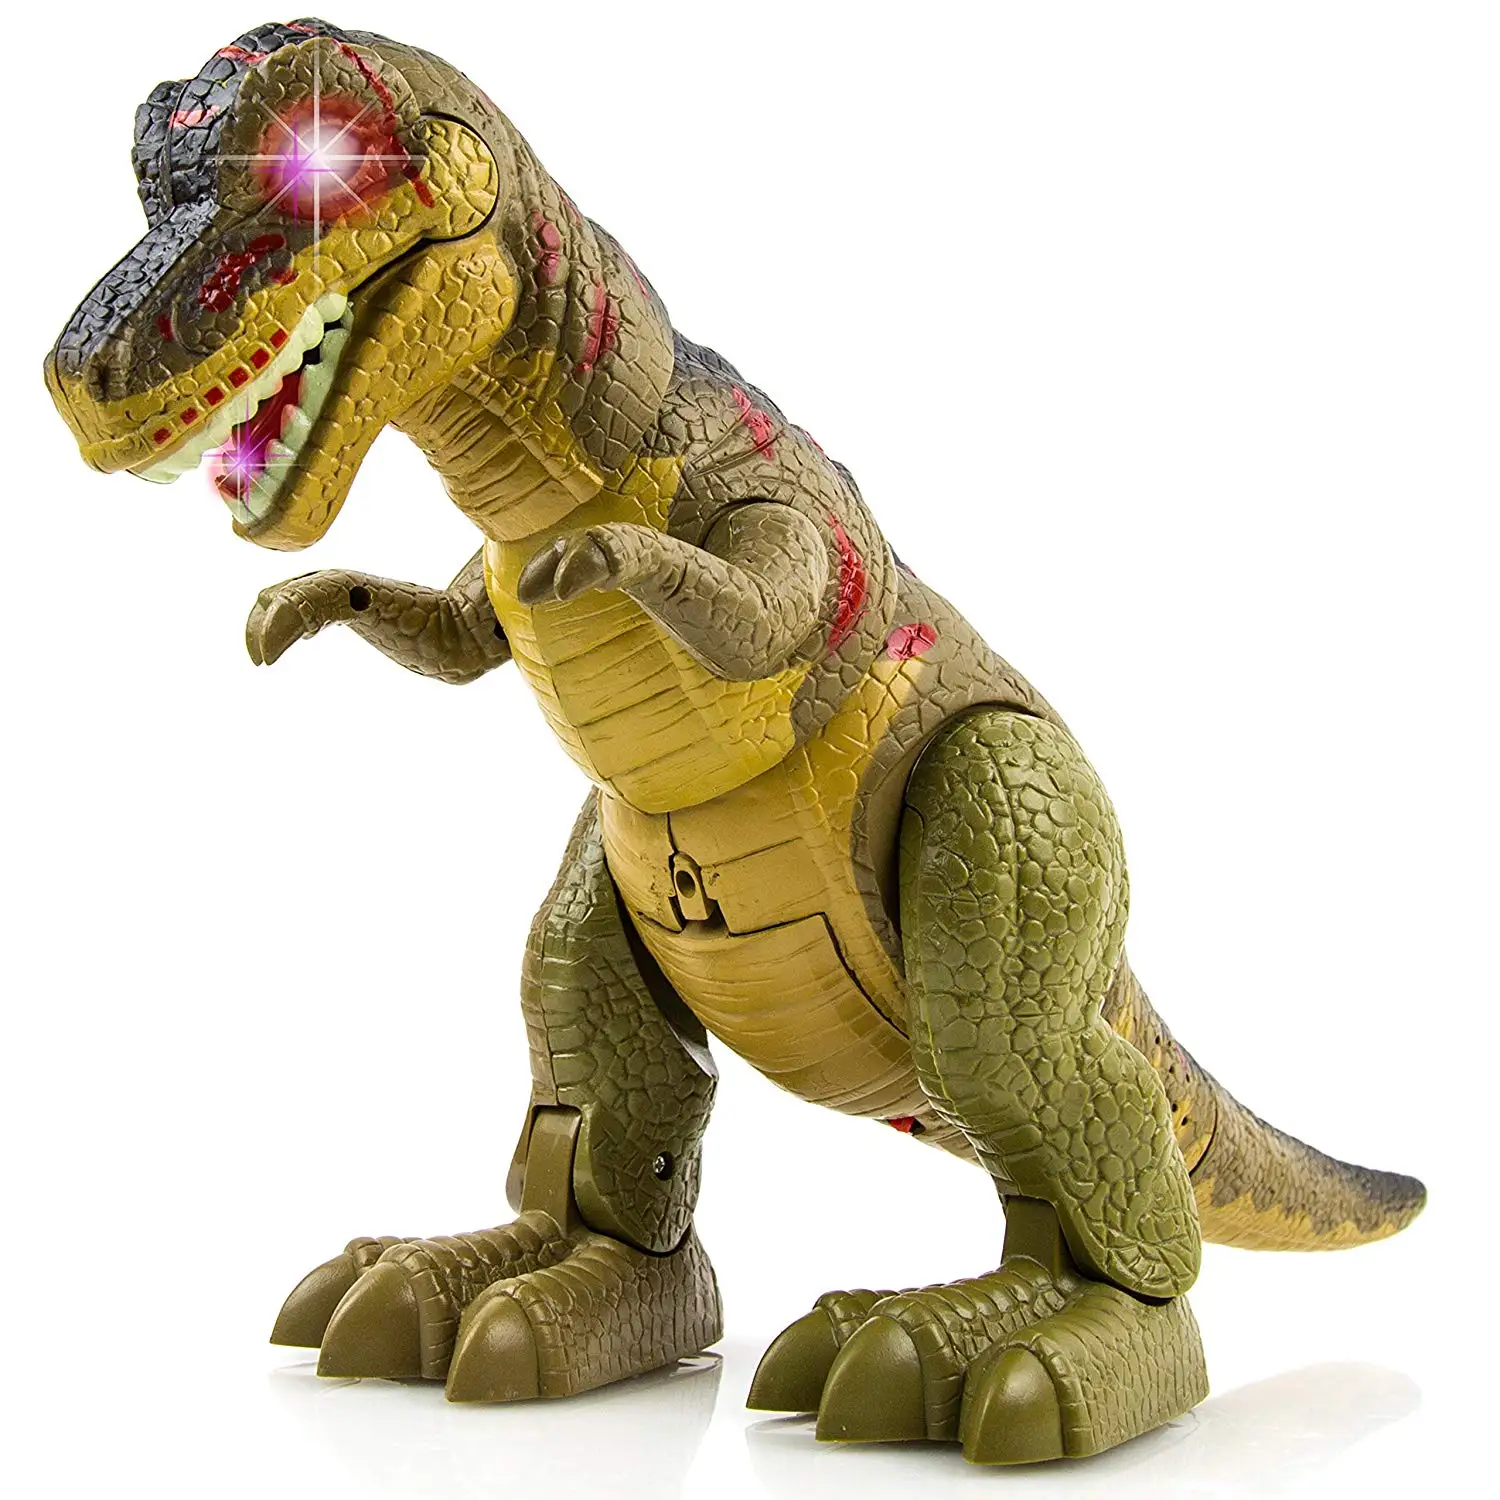 cool dinosaur toys for toddlers